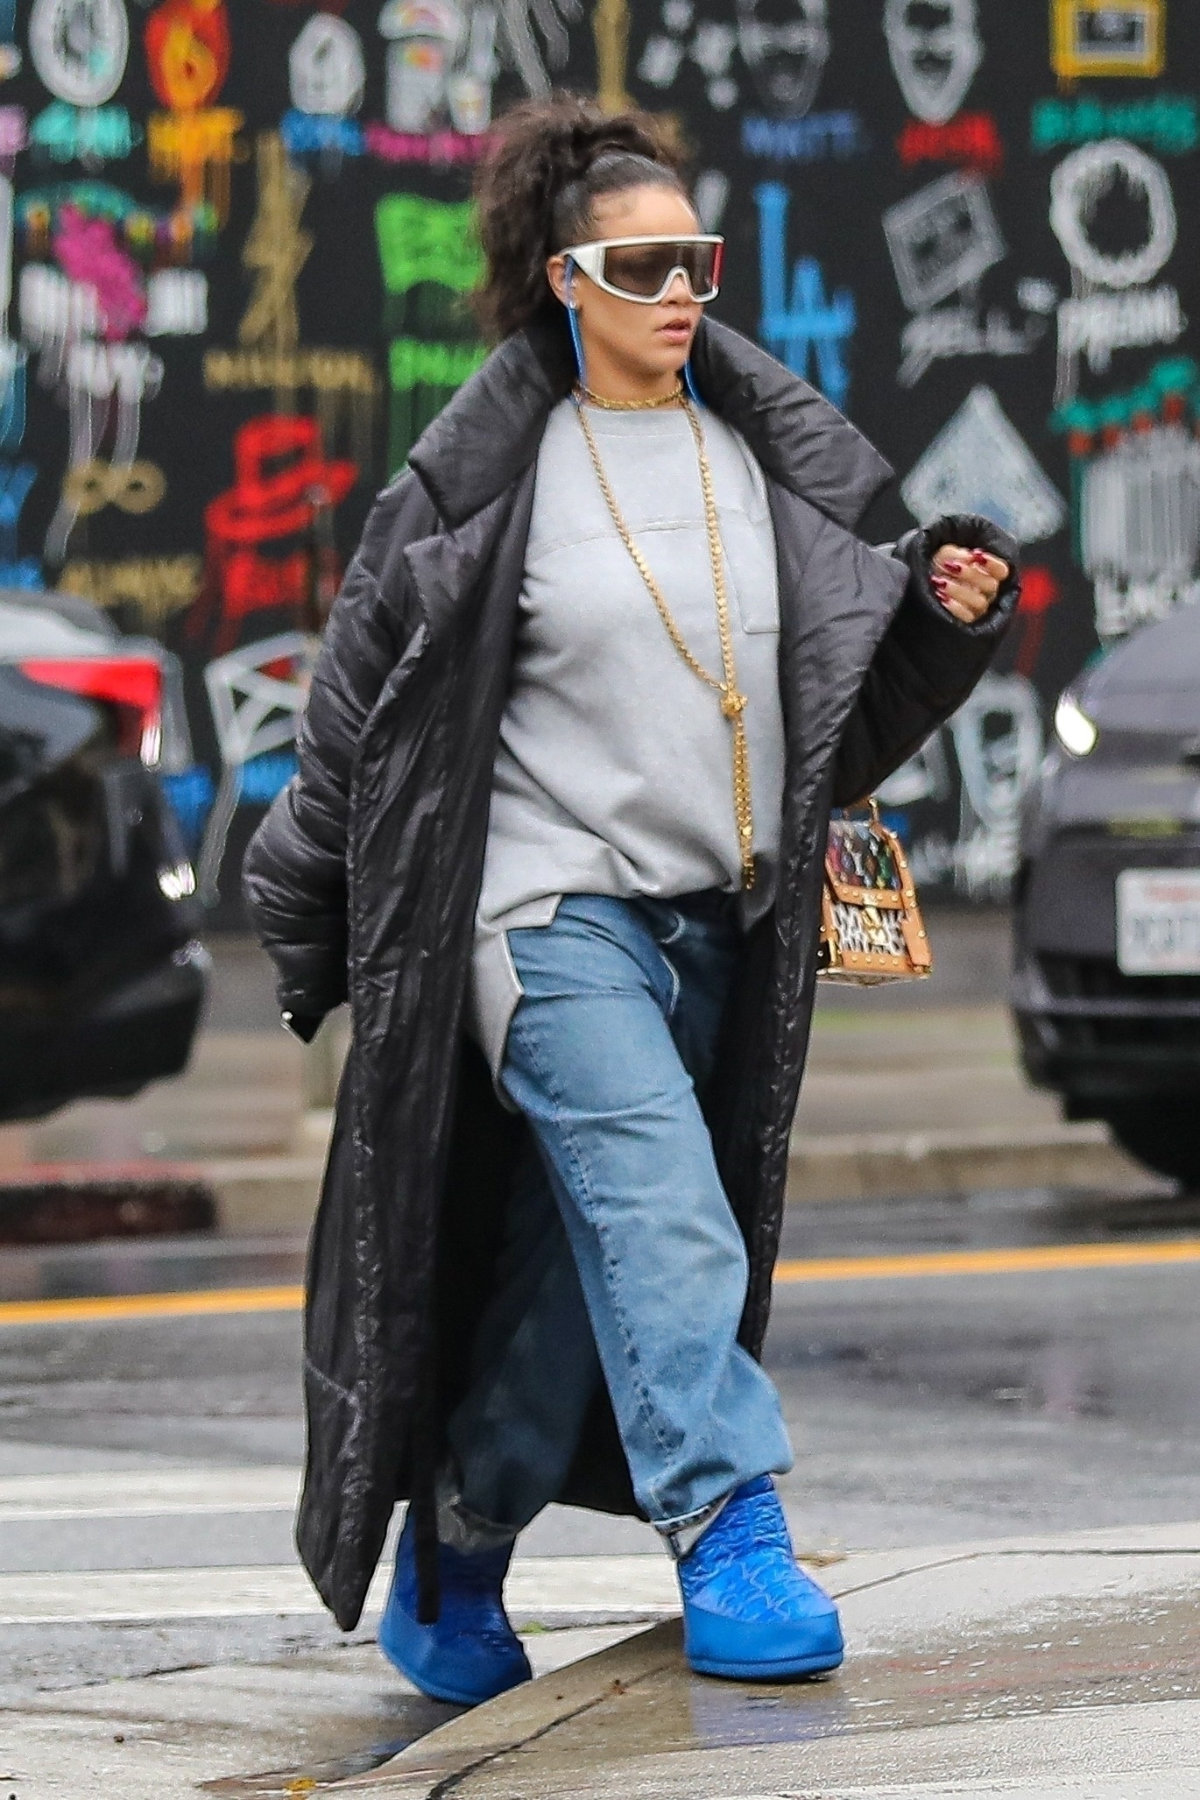 *PREMIUM-EXCLUSIVE* Pregnant Mama Rihanna shops for essentials at CVS on a rainy day in LA **WEB EMBARGO UNTIL 4:30 pm ET on March 23, 2023**